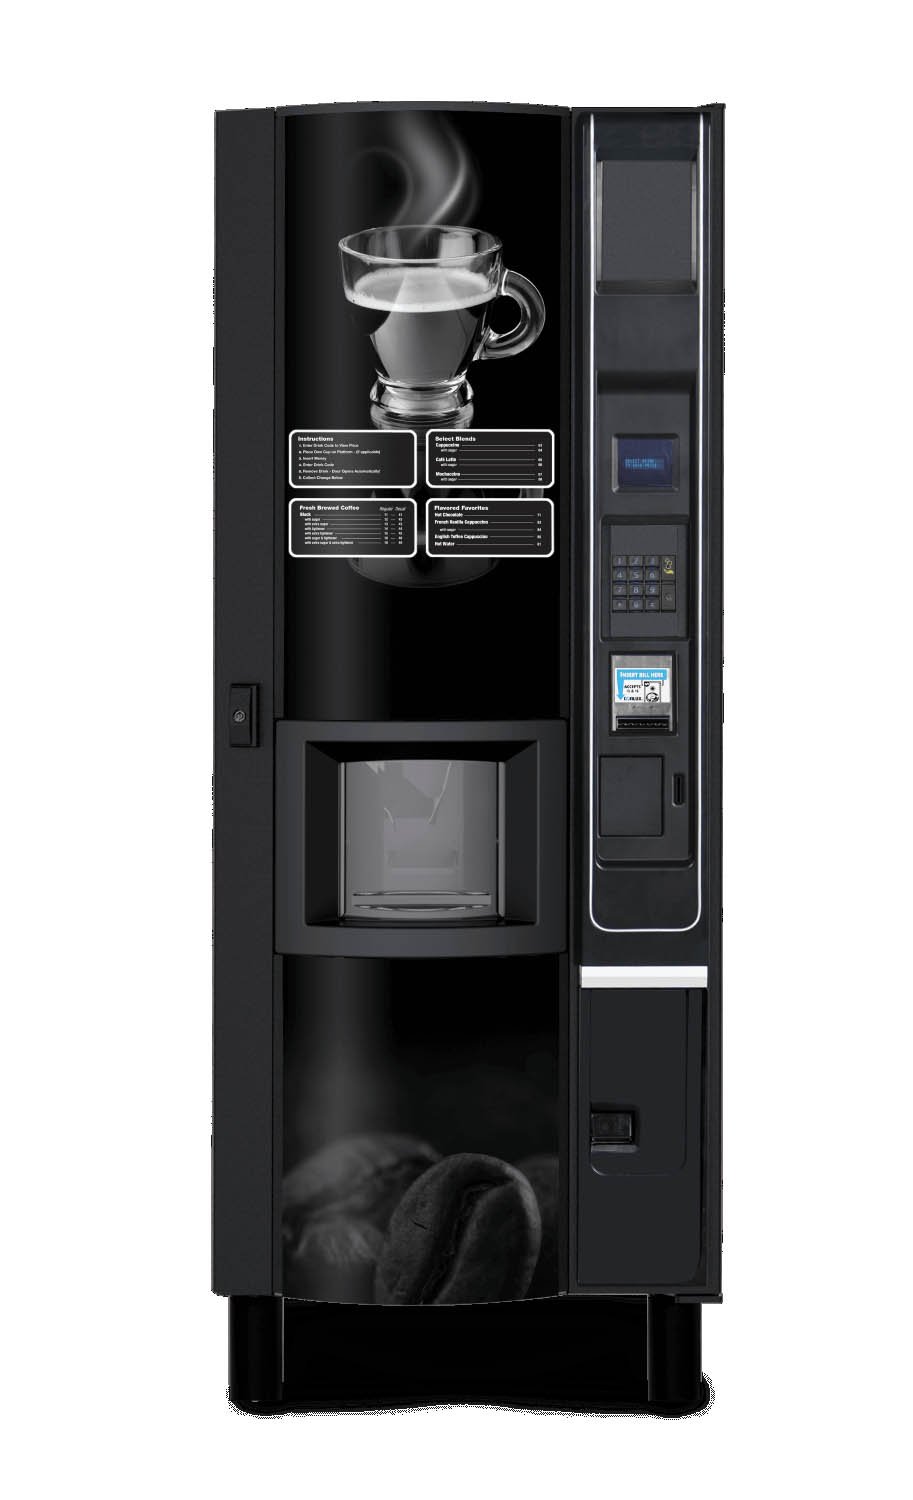 Decoding the Art of Selecting Prime Locations for Your Coffee Vending Machines